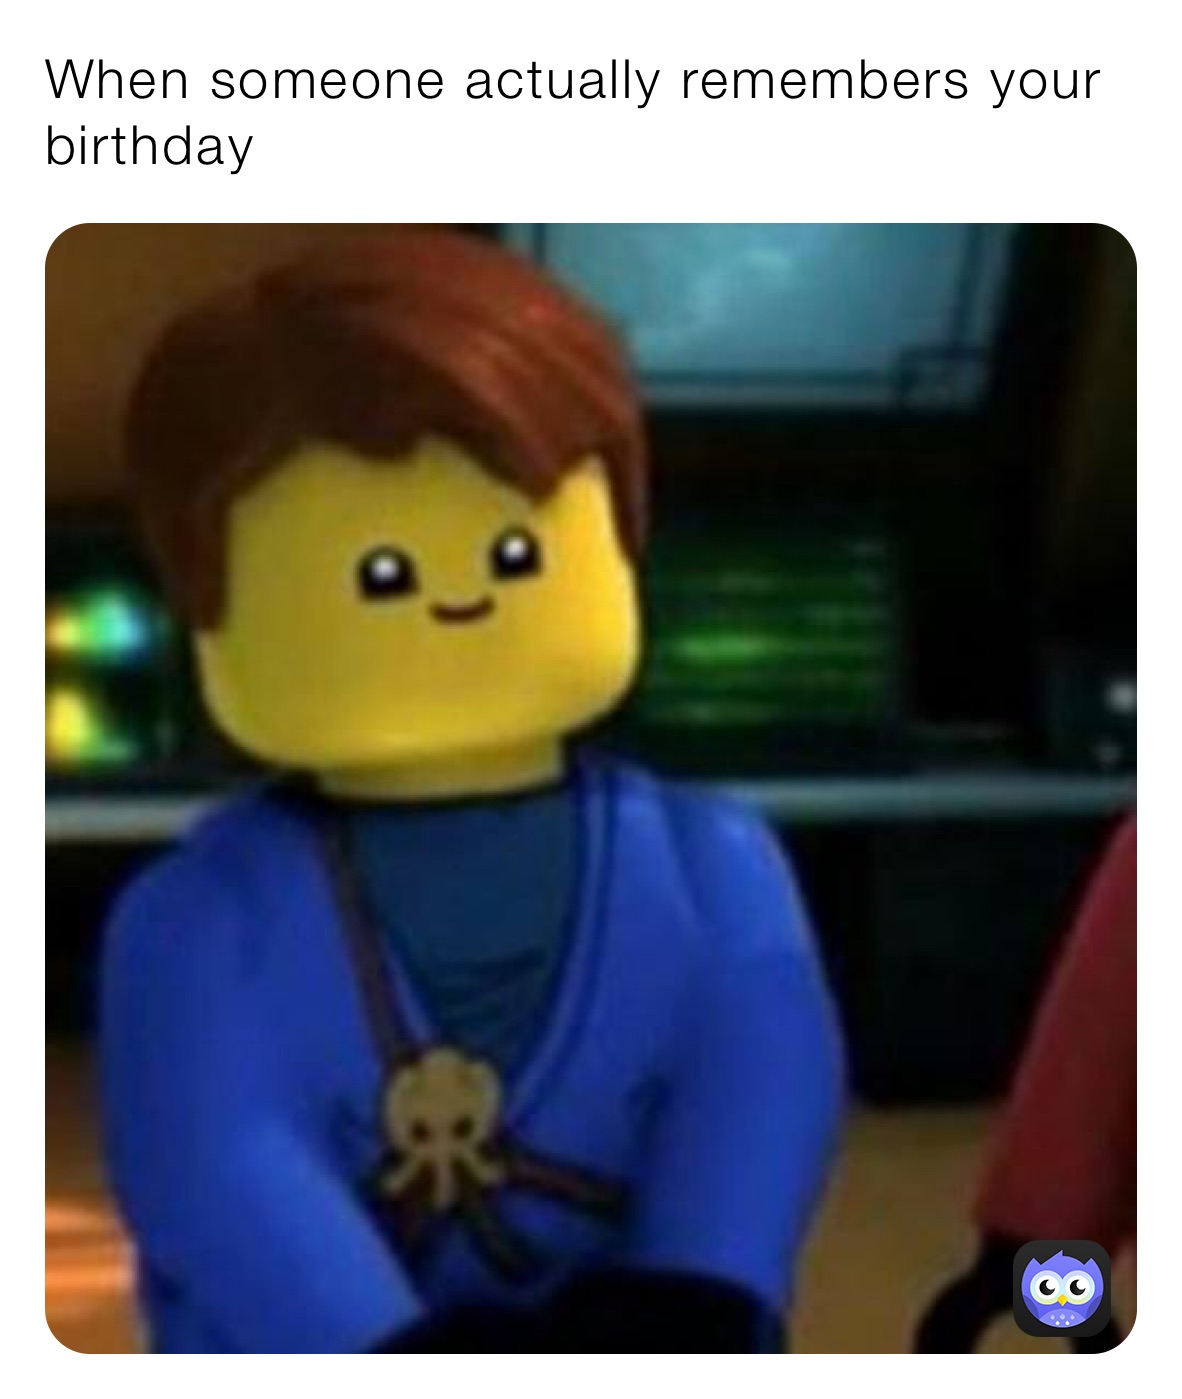 When someone actually remembers your birthday